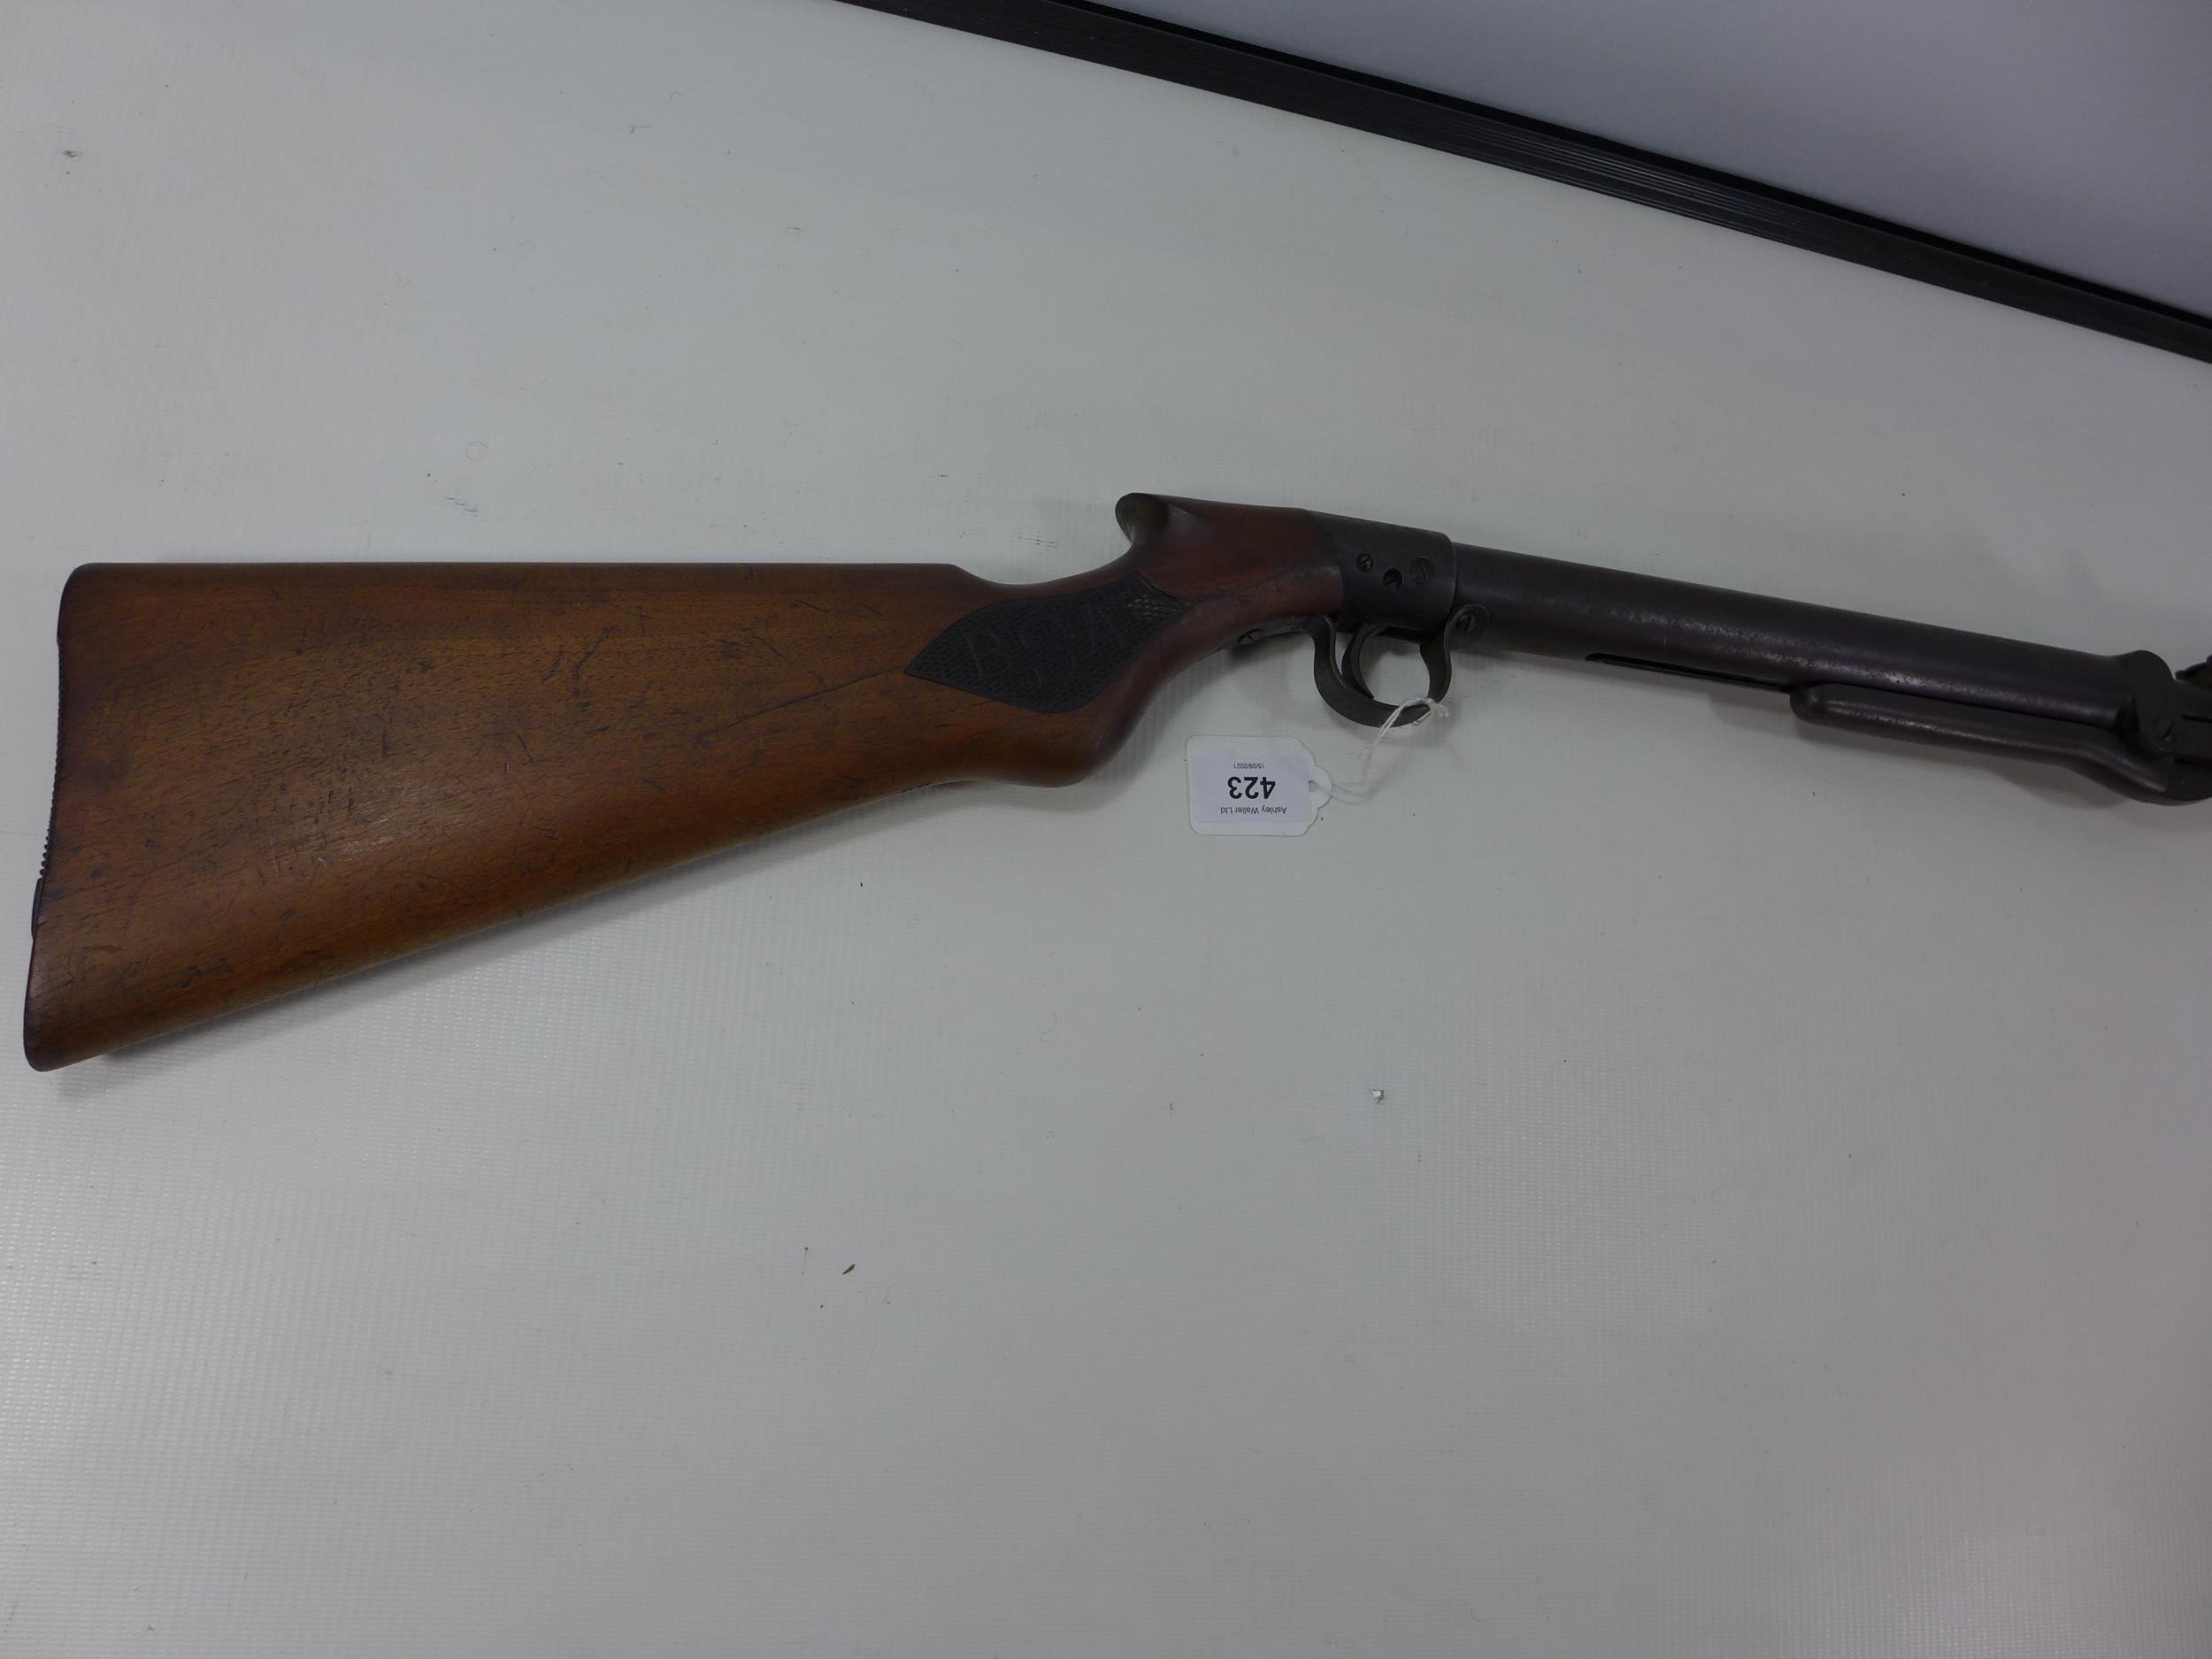 A B.S.A. .22 CALIBRE UNDERLEVER AIR RIFLE, 49CM BARREL, SERIAL NUMBER S40879 - Image 4 of 6